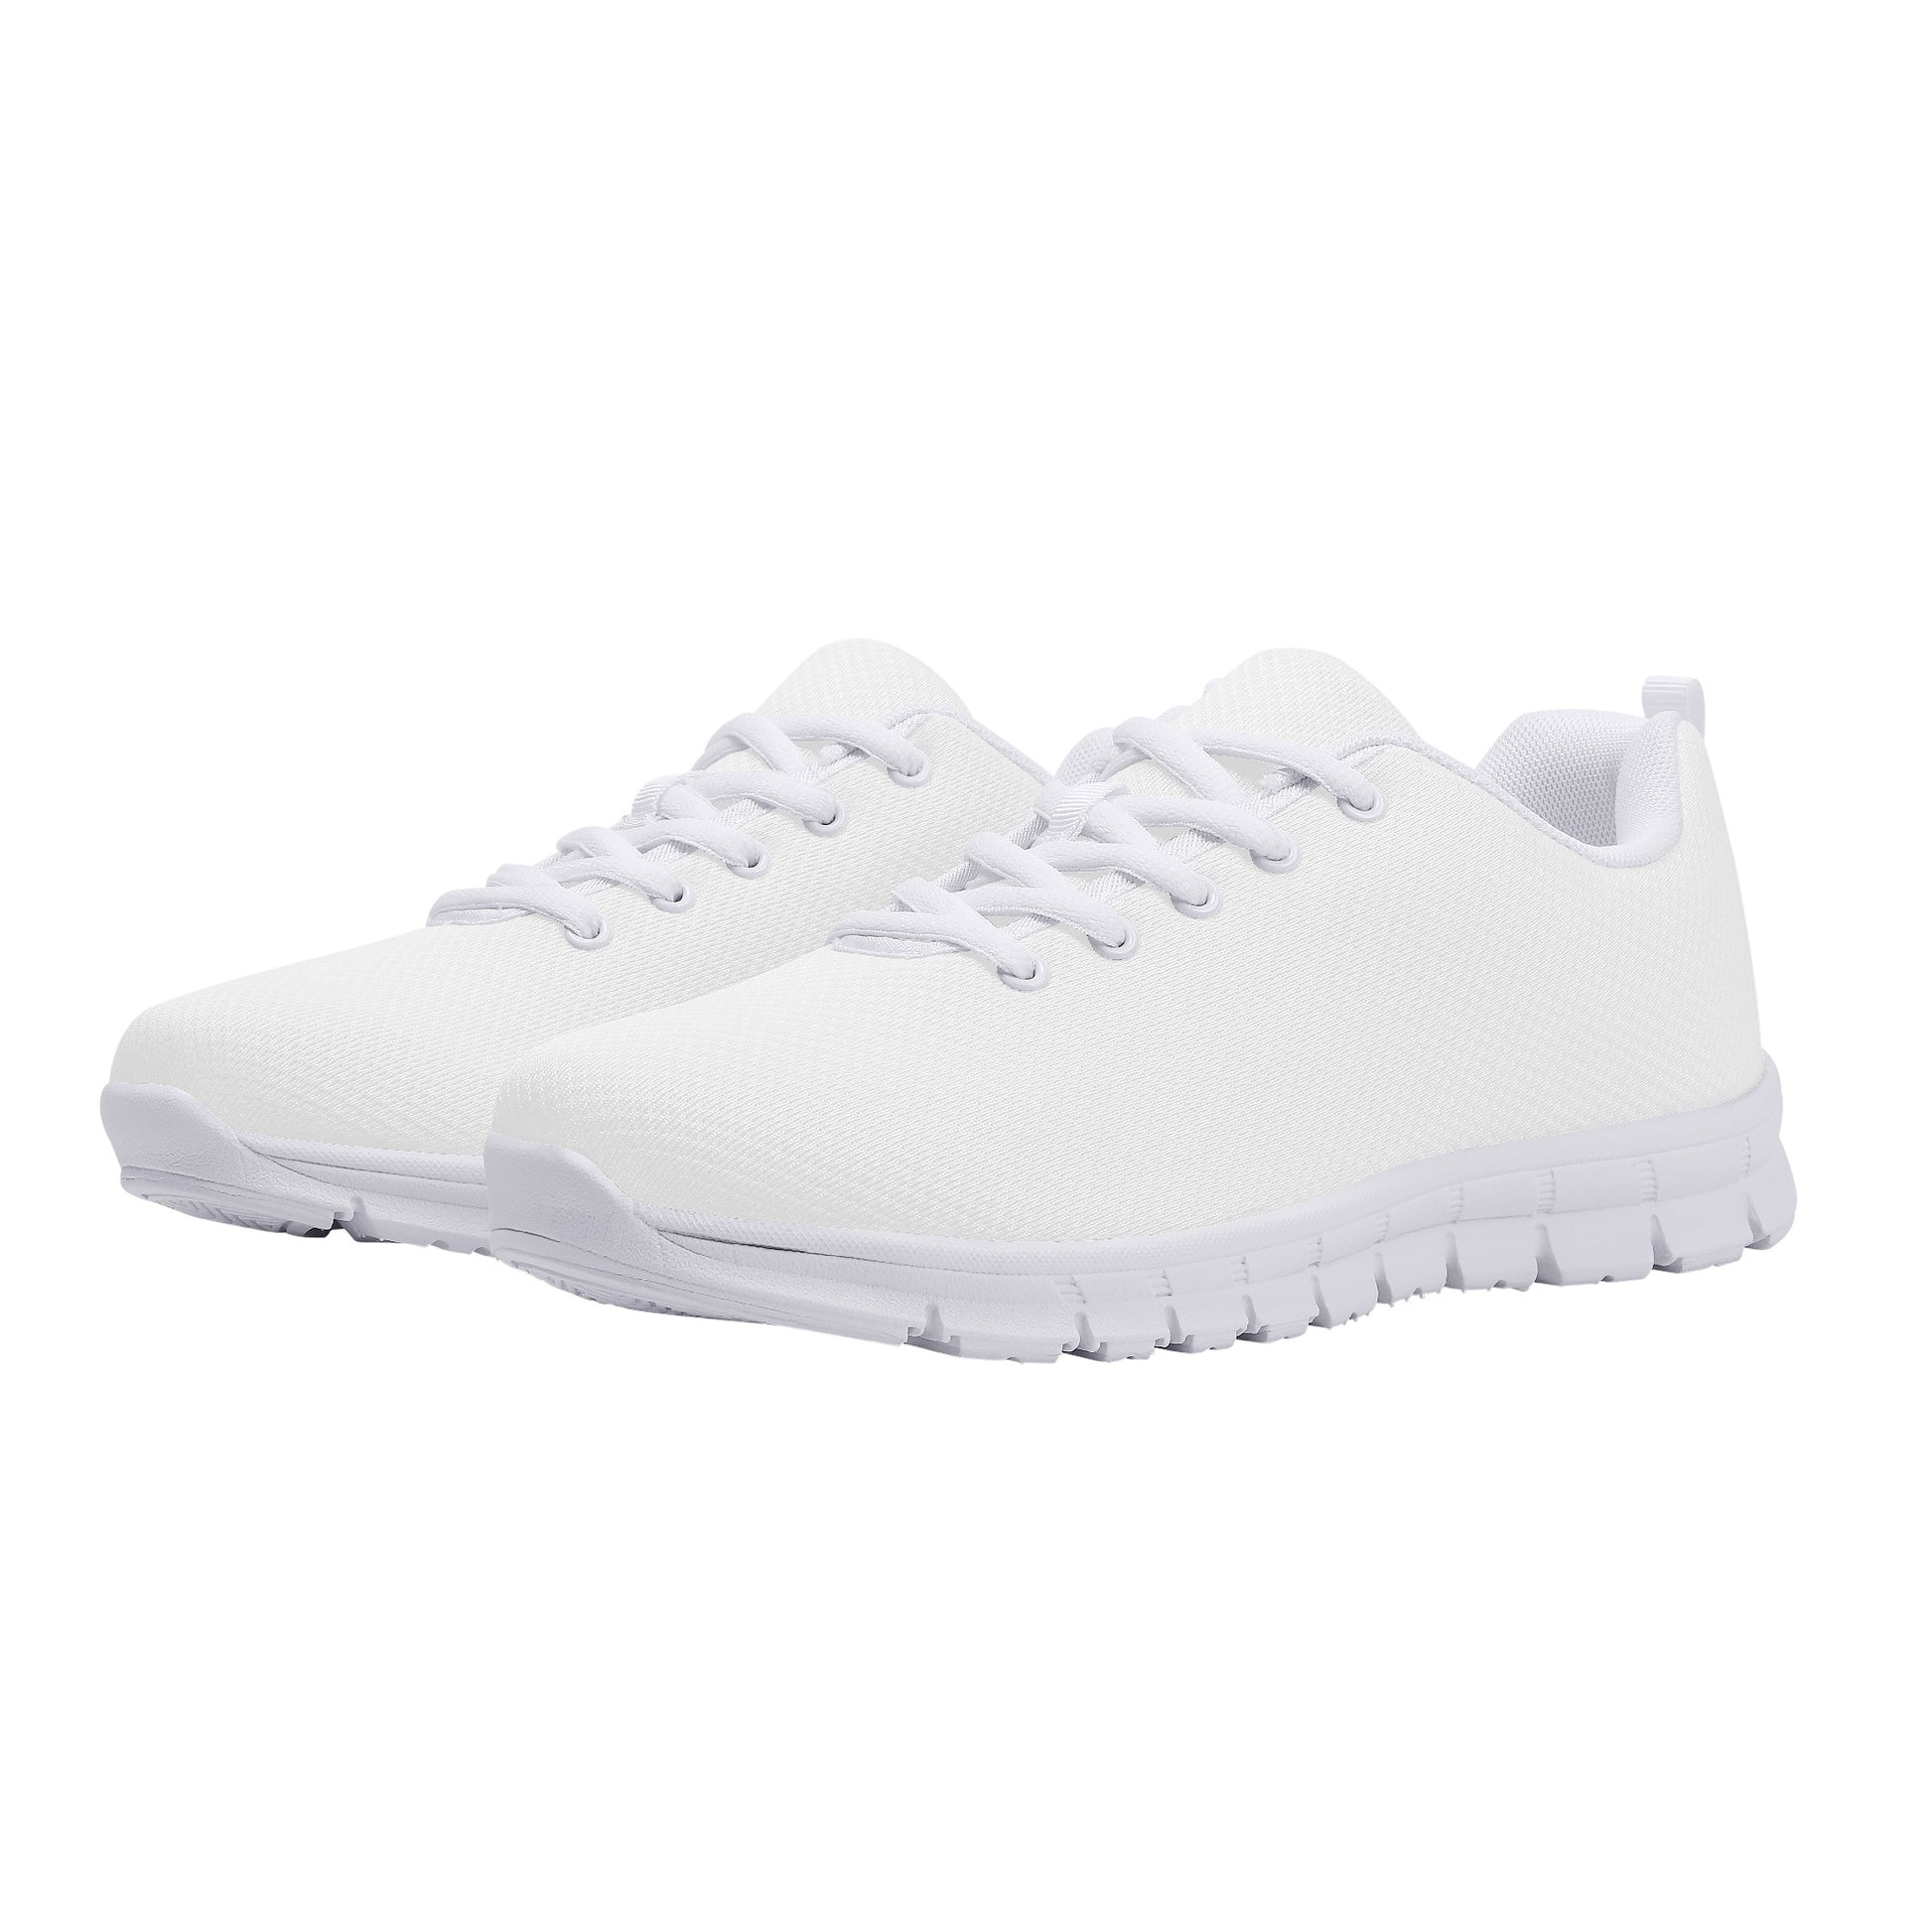 Create Your Own - Mesh Sneakers - White - HayGoodies